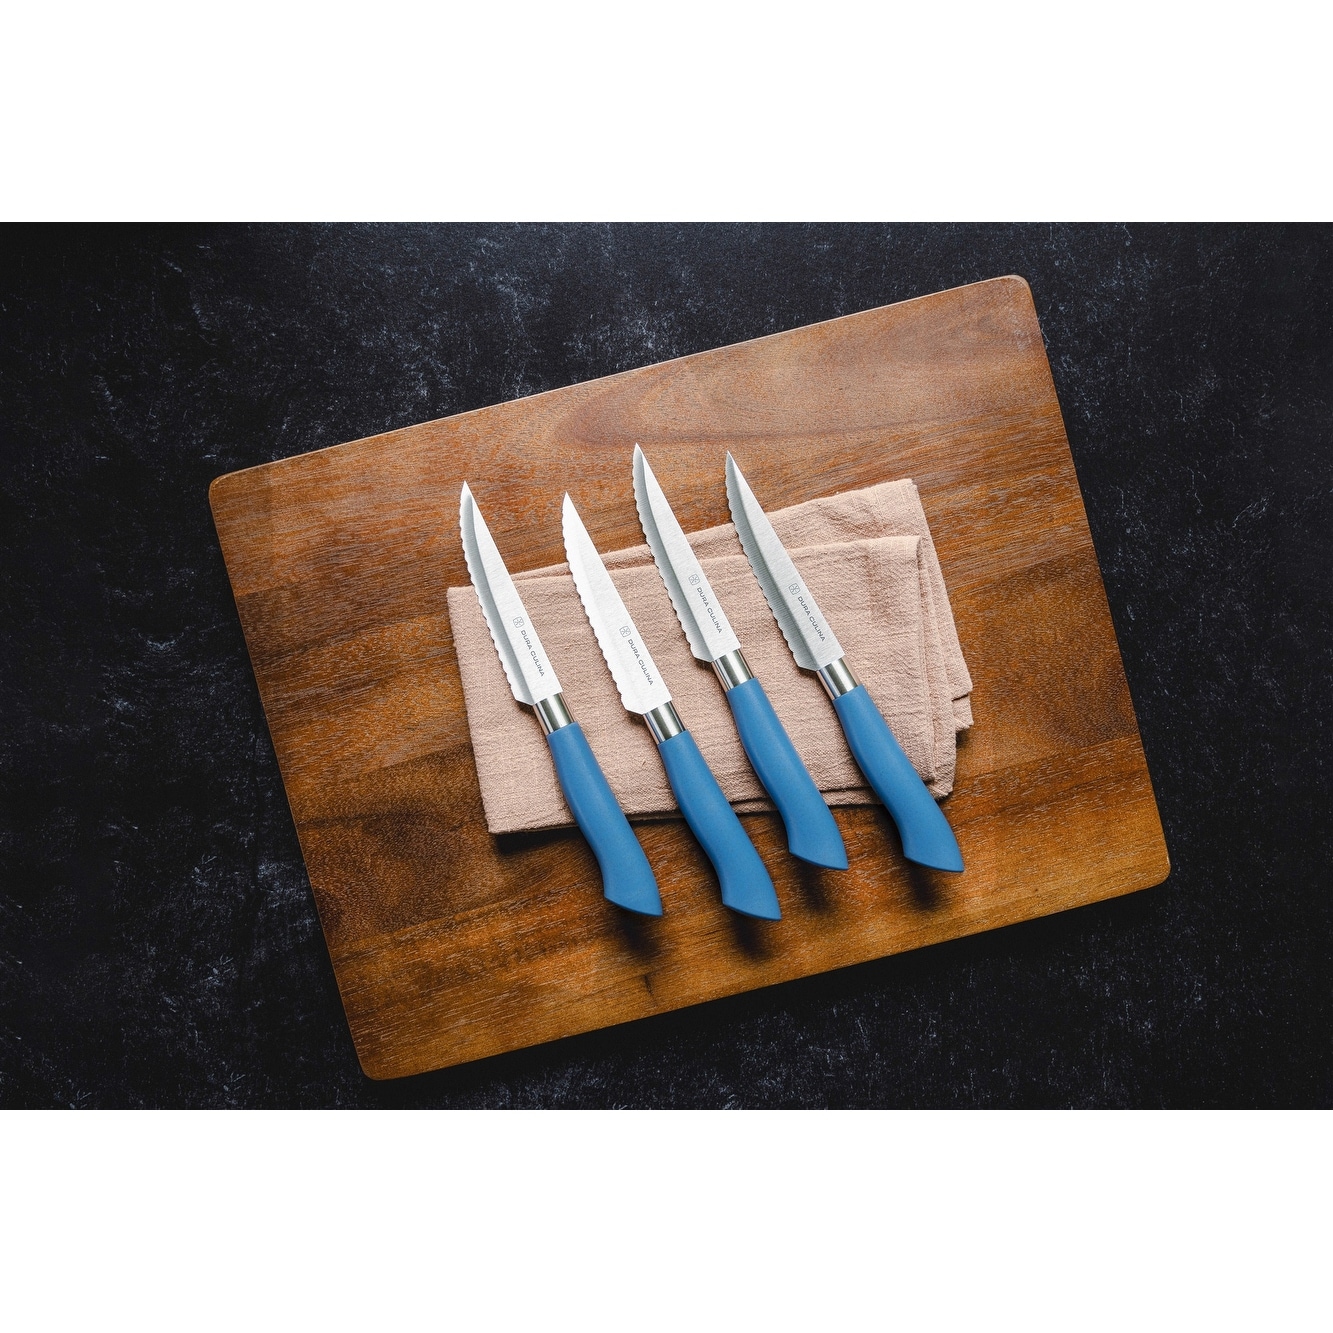 https://ak1.ostkcdn.com/images/products/is/images/direct/04b29778420f12409e04a4f3be7f7b8cedd3ba20/DURA-LIVING-EcoCut-Set-of-4-Steak-Knives---High-Carbon-Micro-Serrated-Stainless-Steel%2C-Sustainable-Eco-Friendly-Handle-steak-set.jpg